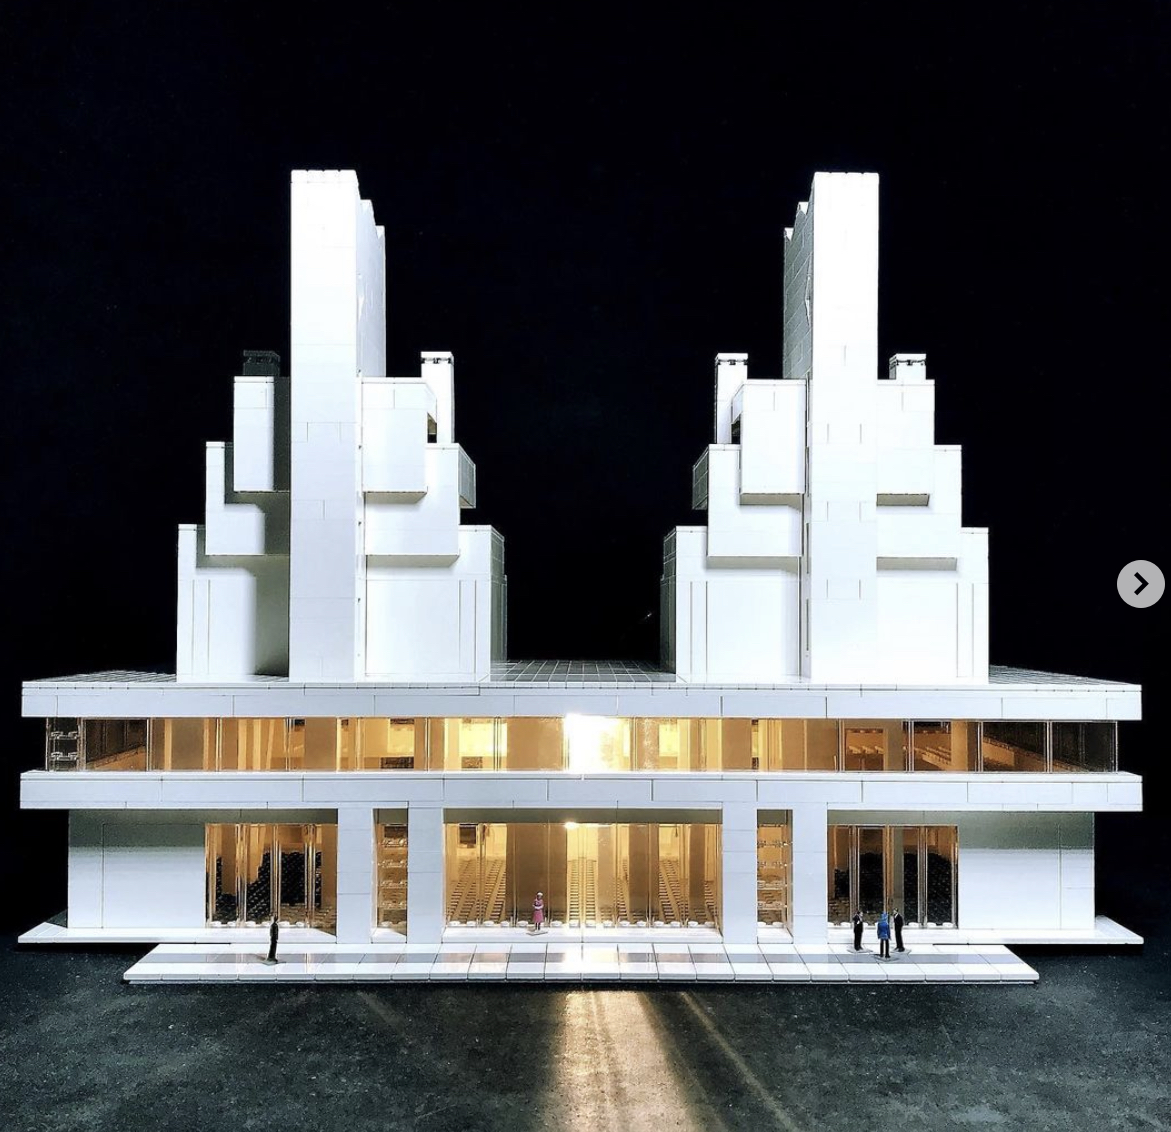 Brutalist architecture recreated with Lego blocks